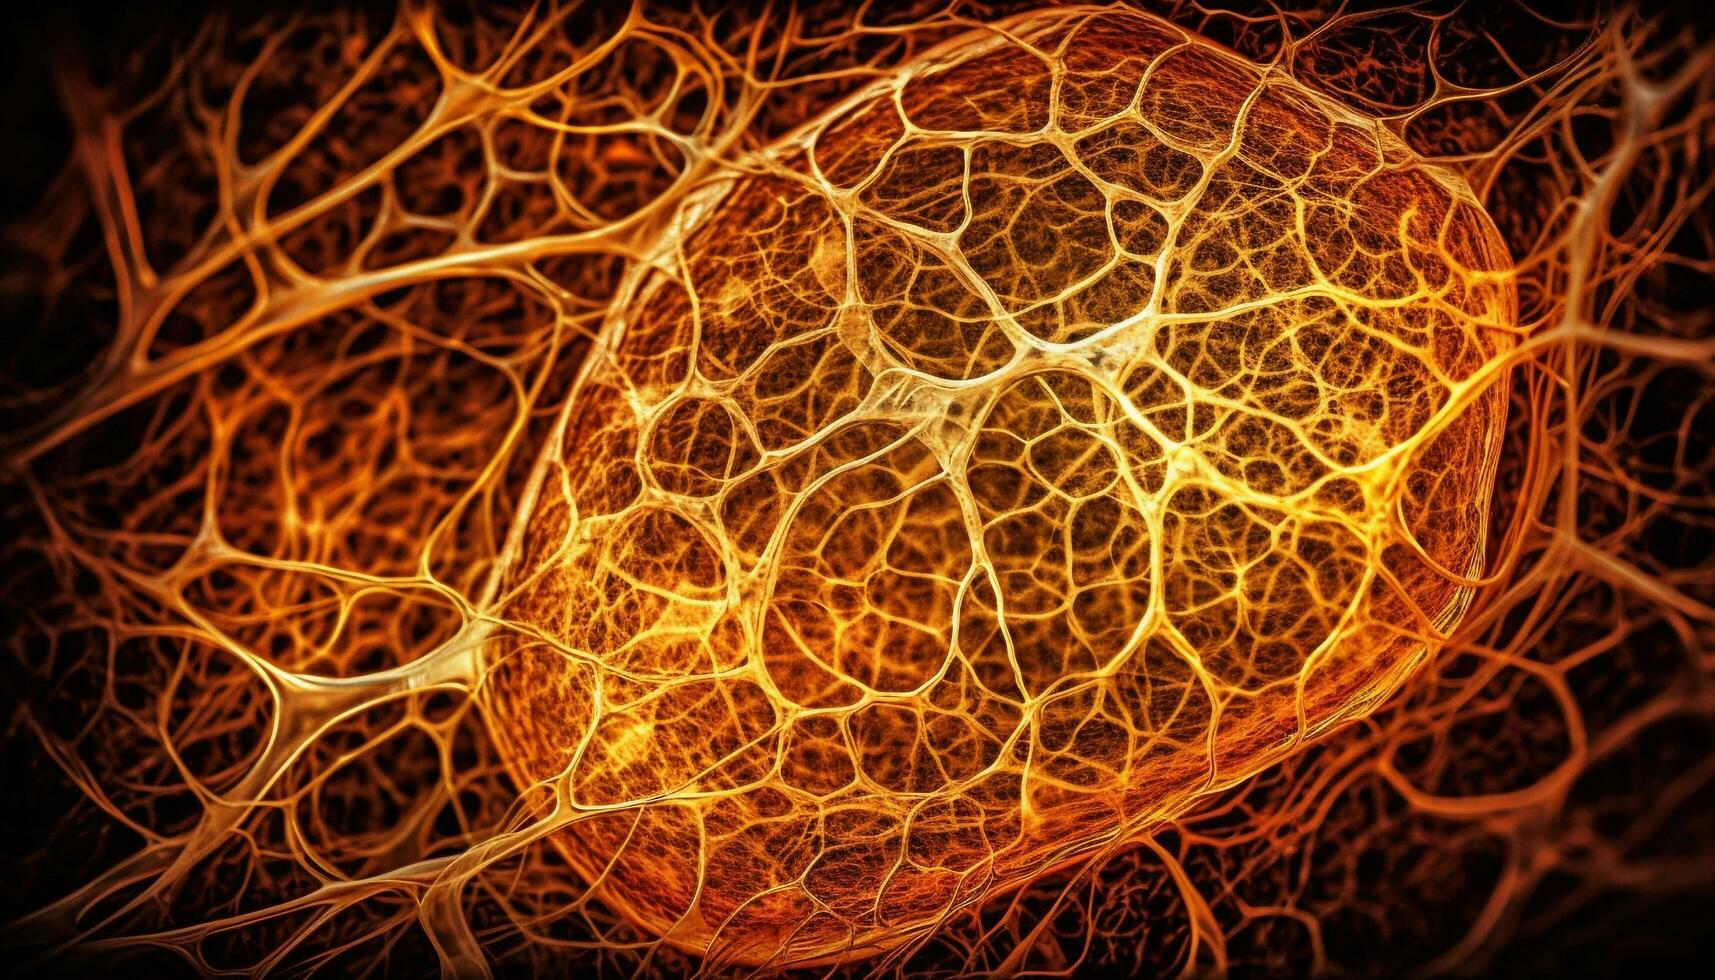 Glowing nerve cells highlight intricate neural connections generated by AI photo